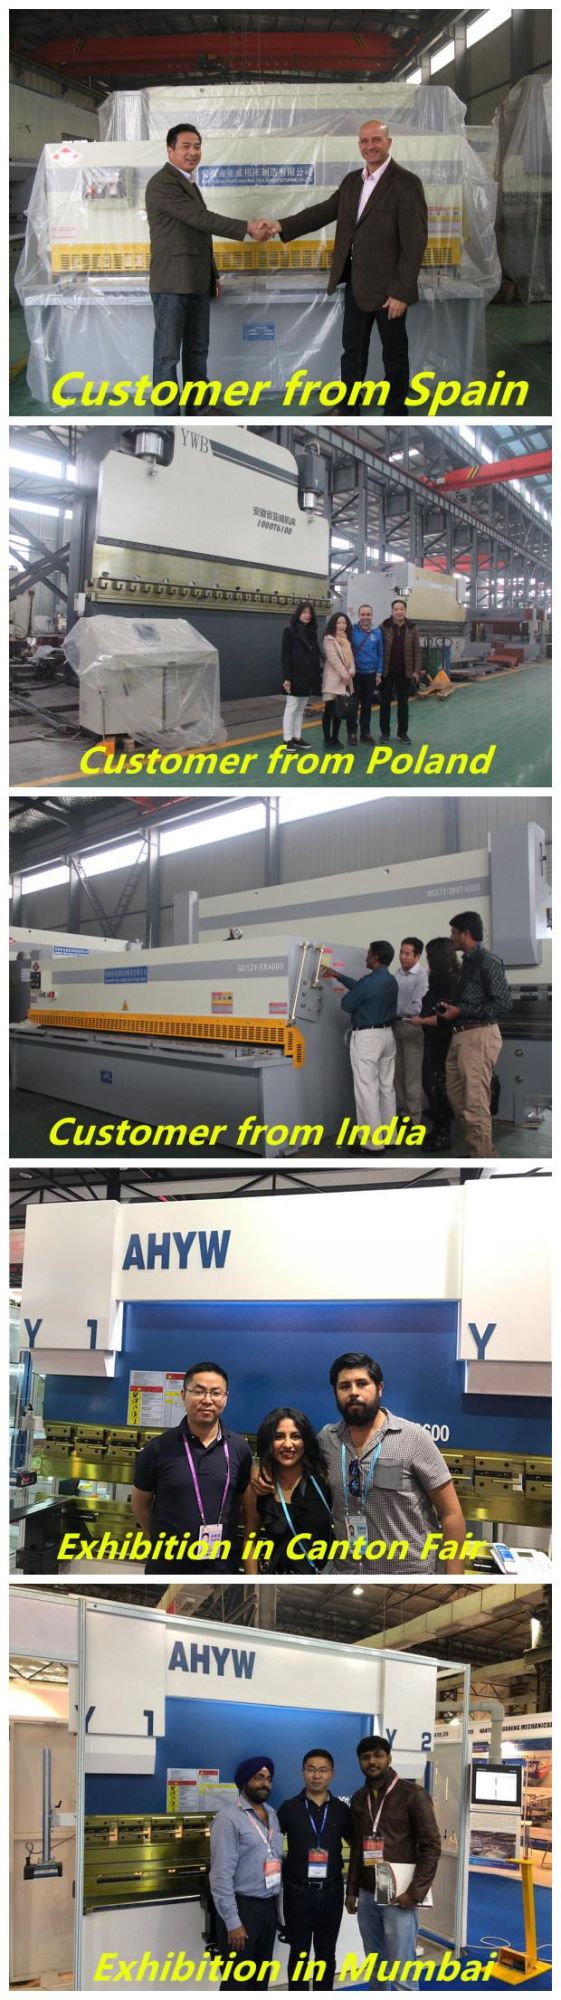 Pacific Press Brake From Anhui Yawei with Ahyw Logo for Metal Sheet Bending